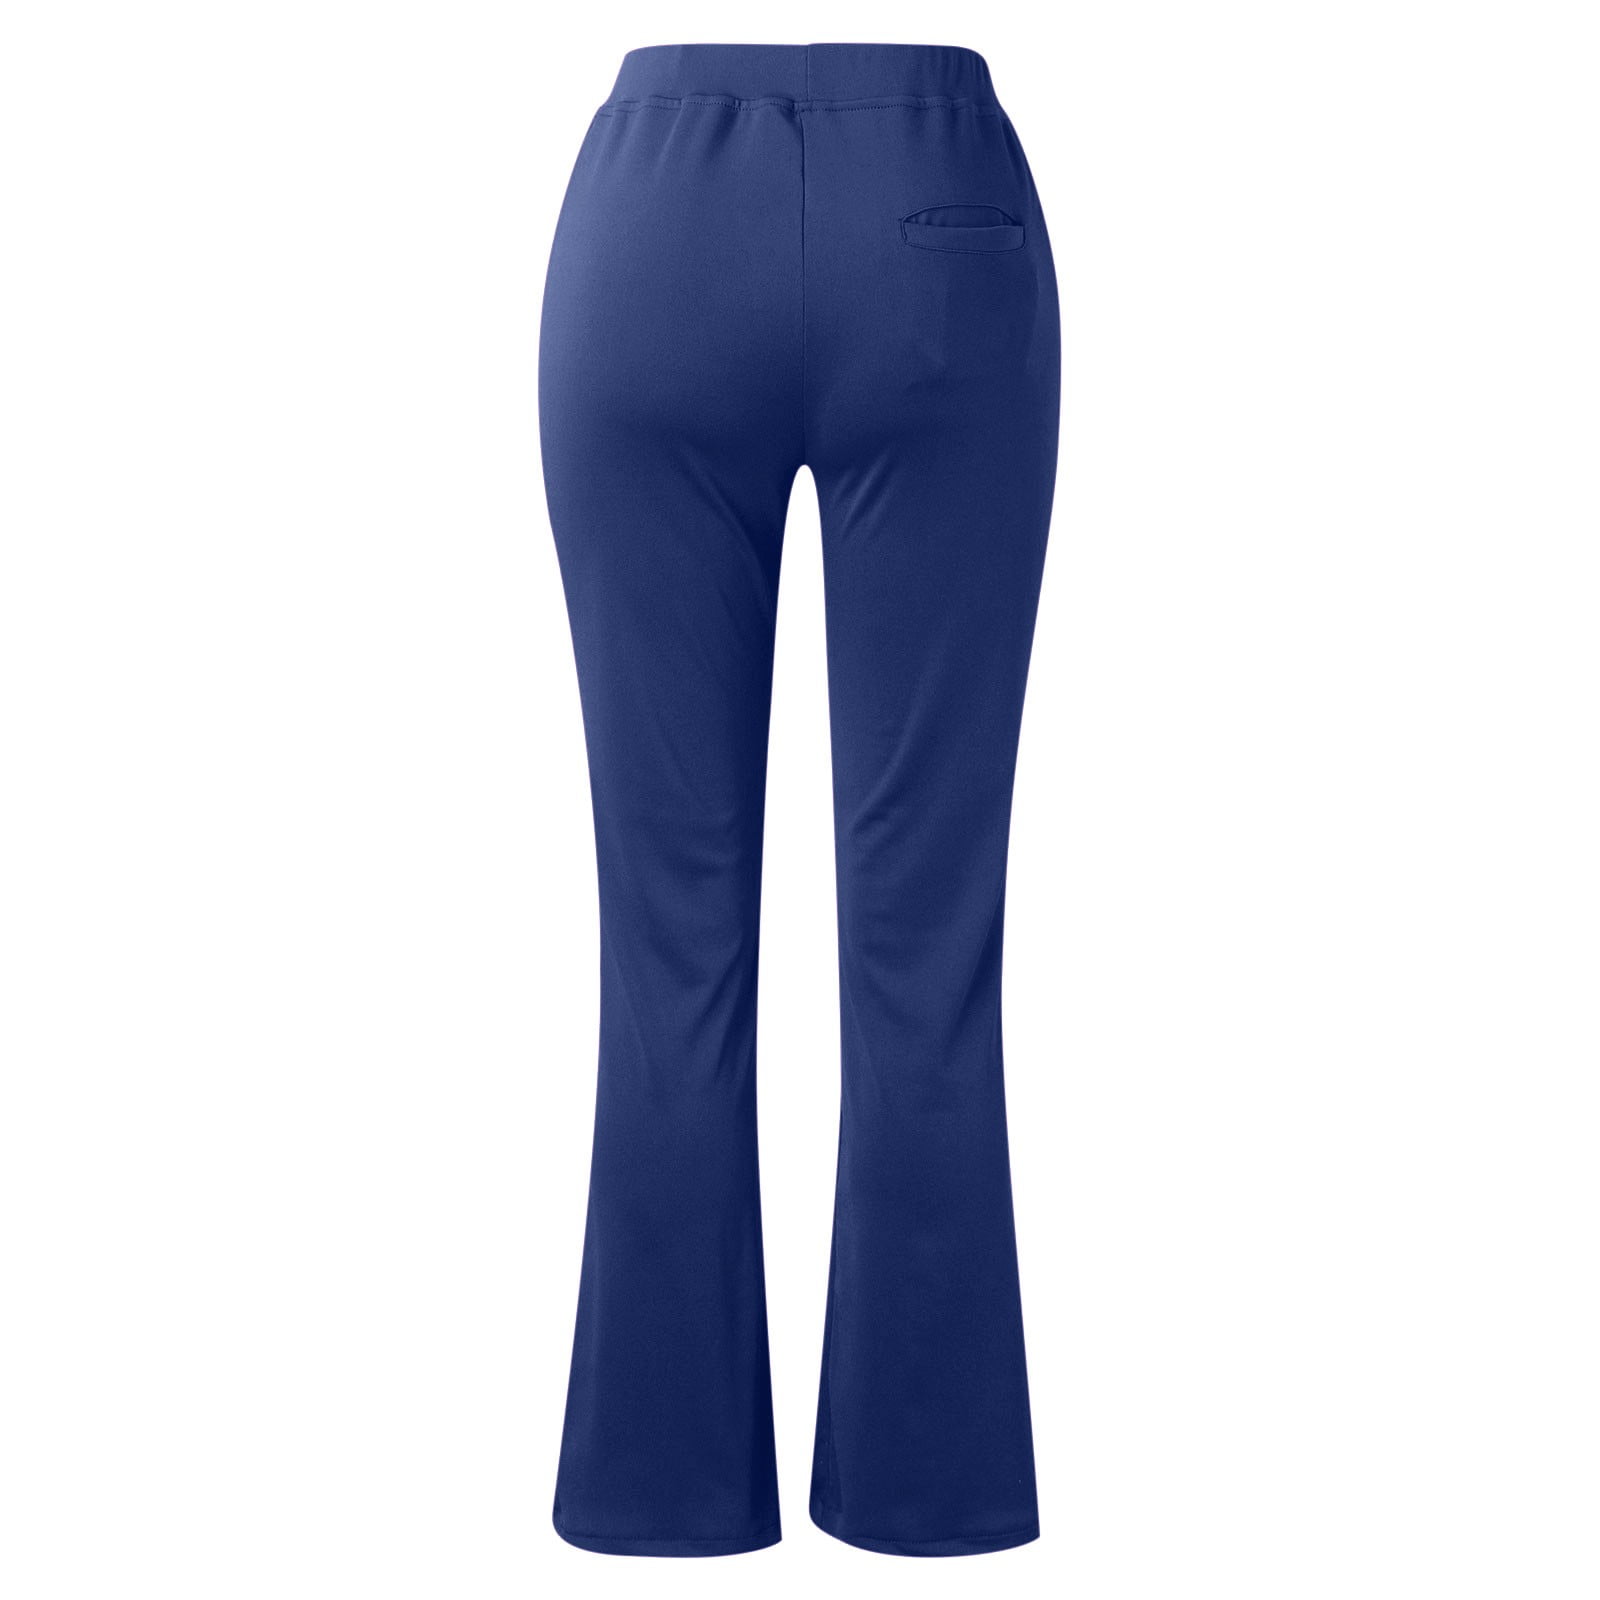 Dress Pants for Womens Stretch Dessy Yoga Trousers Business Work